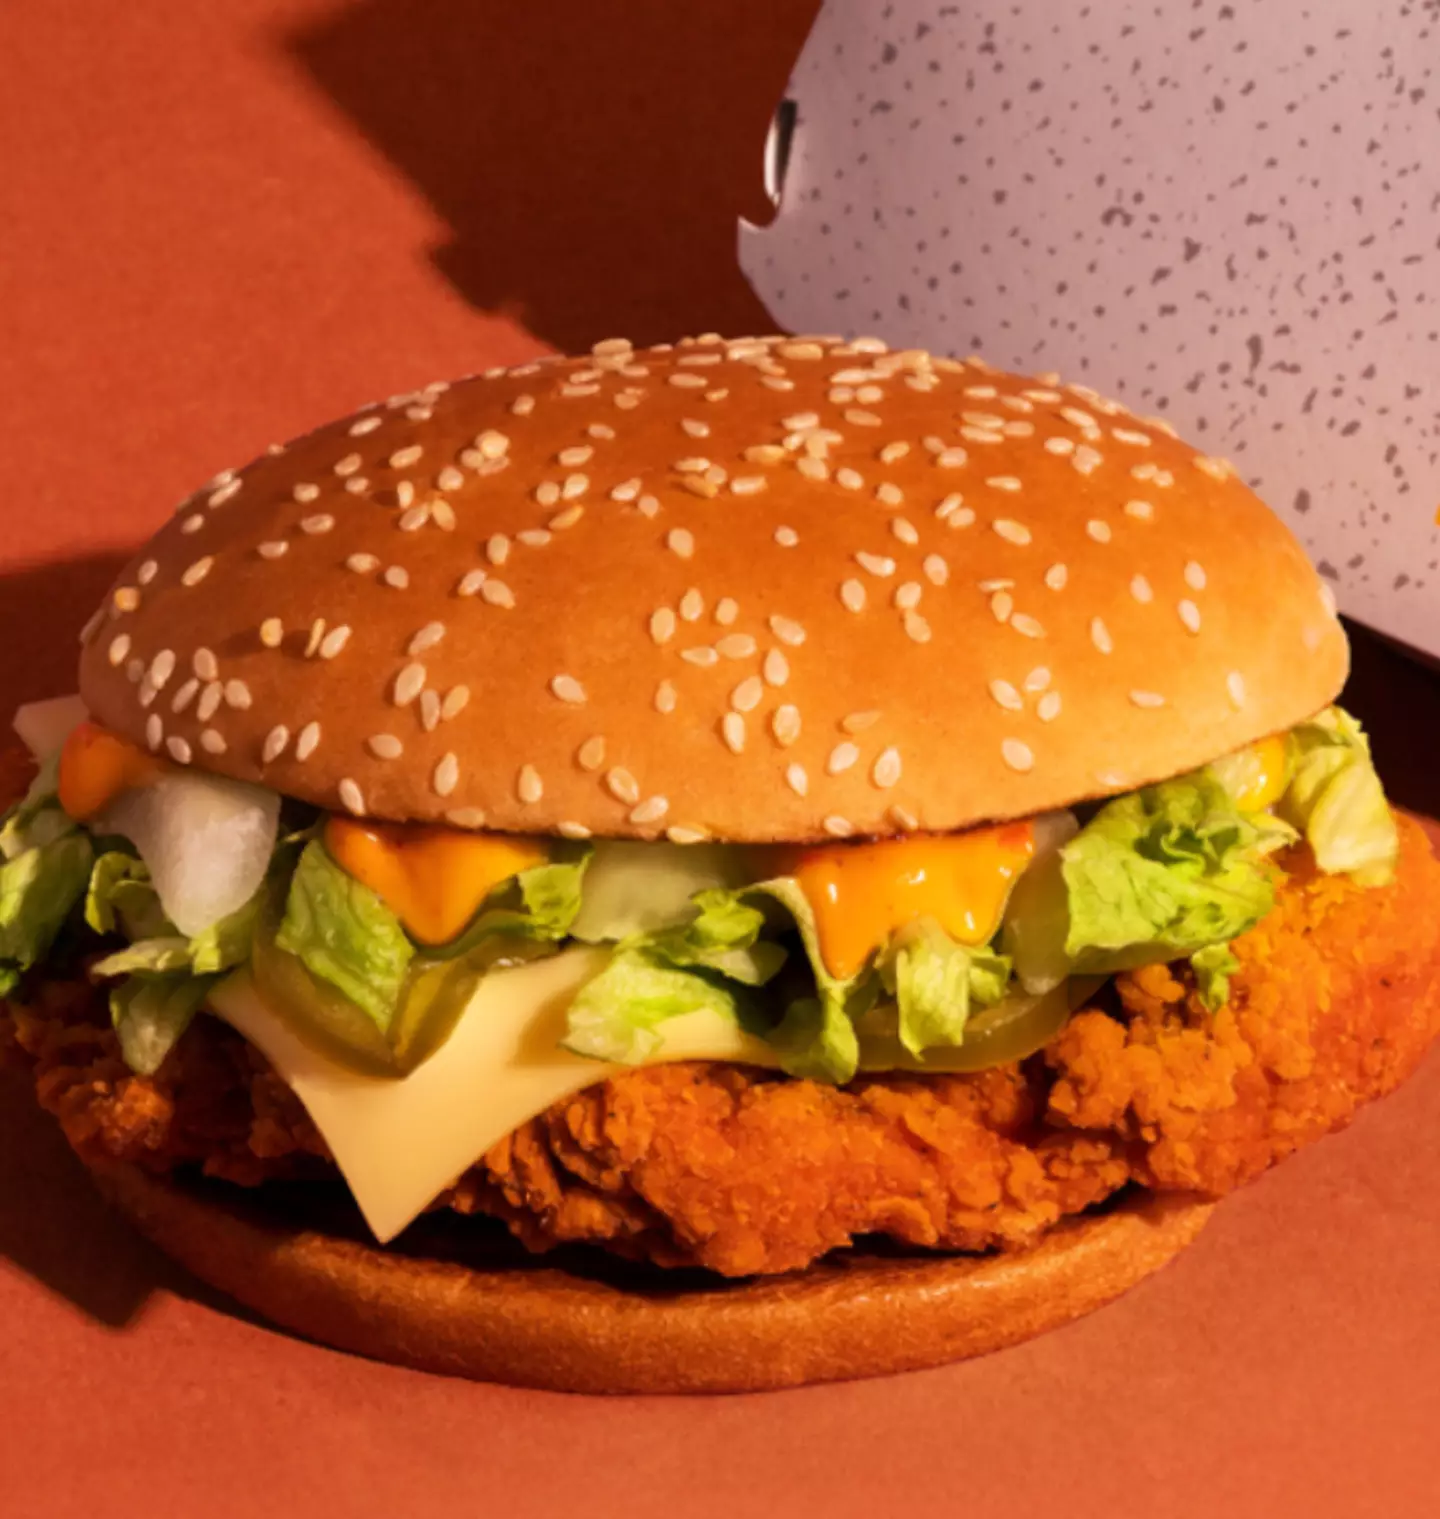 The McSpicy is back.